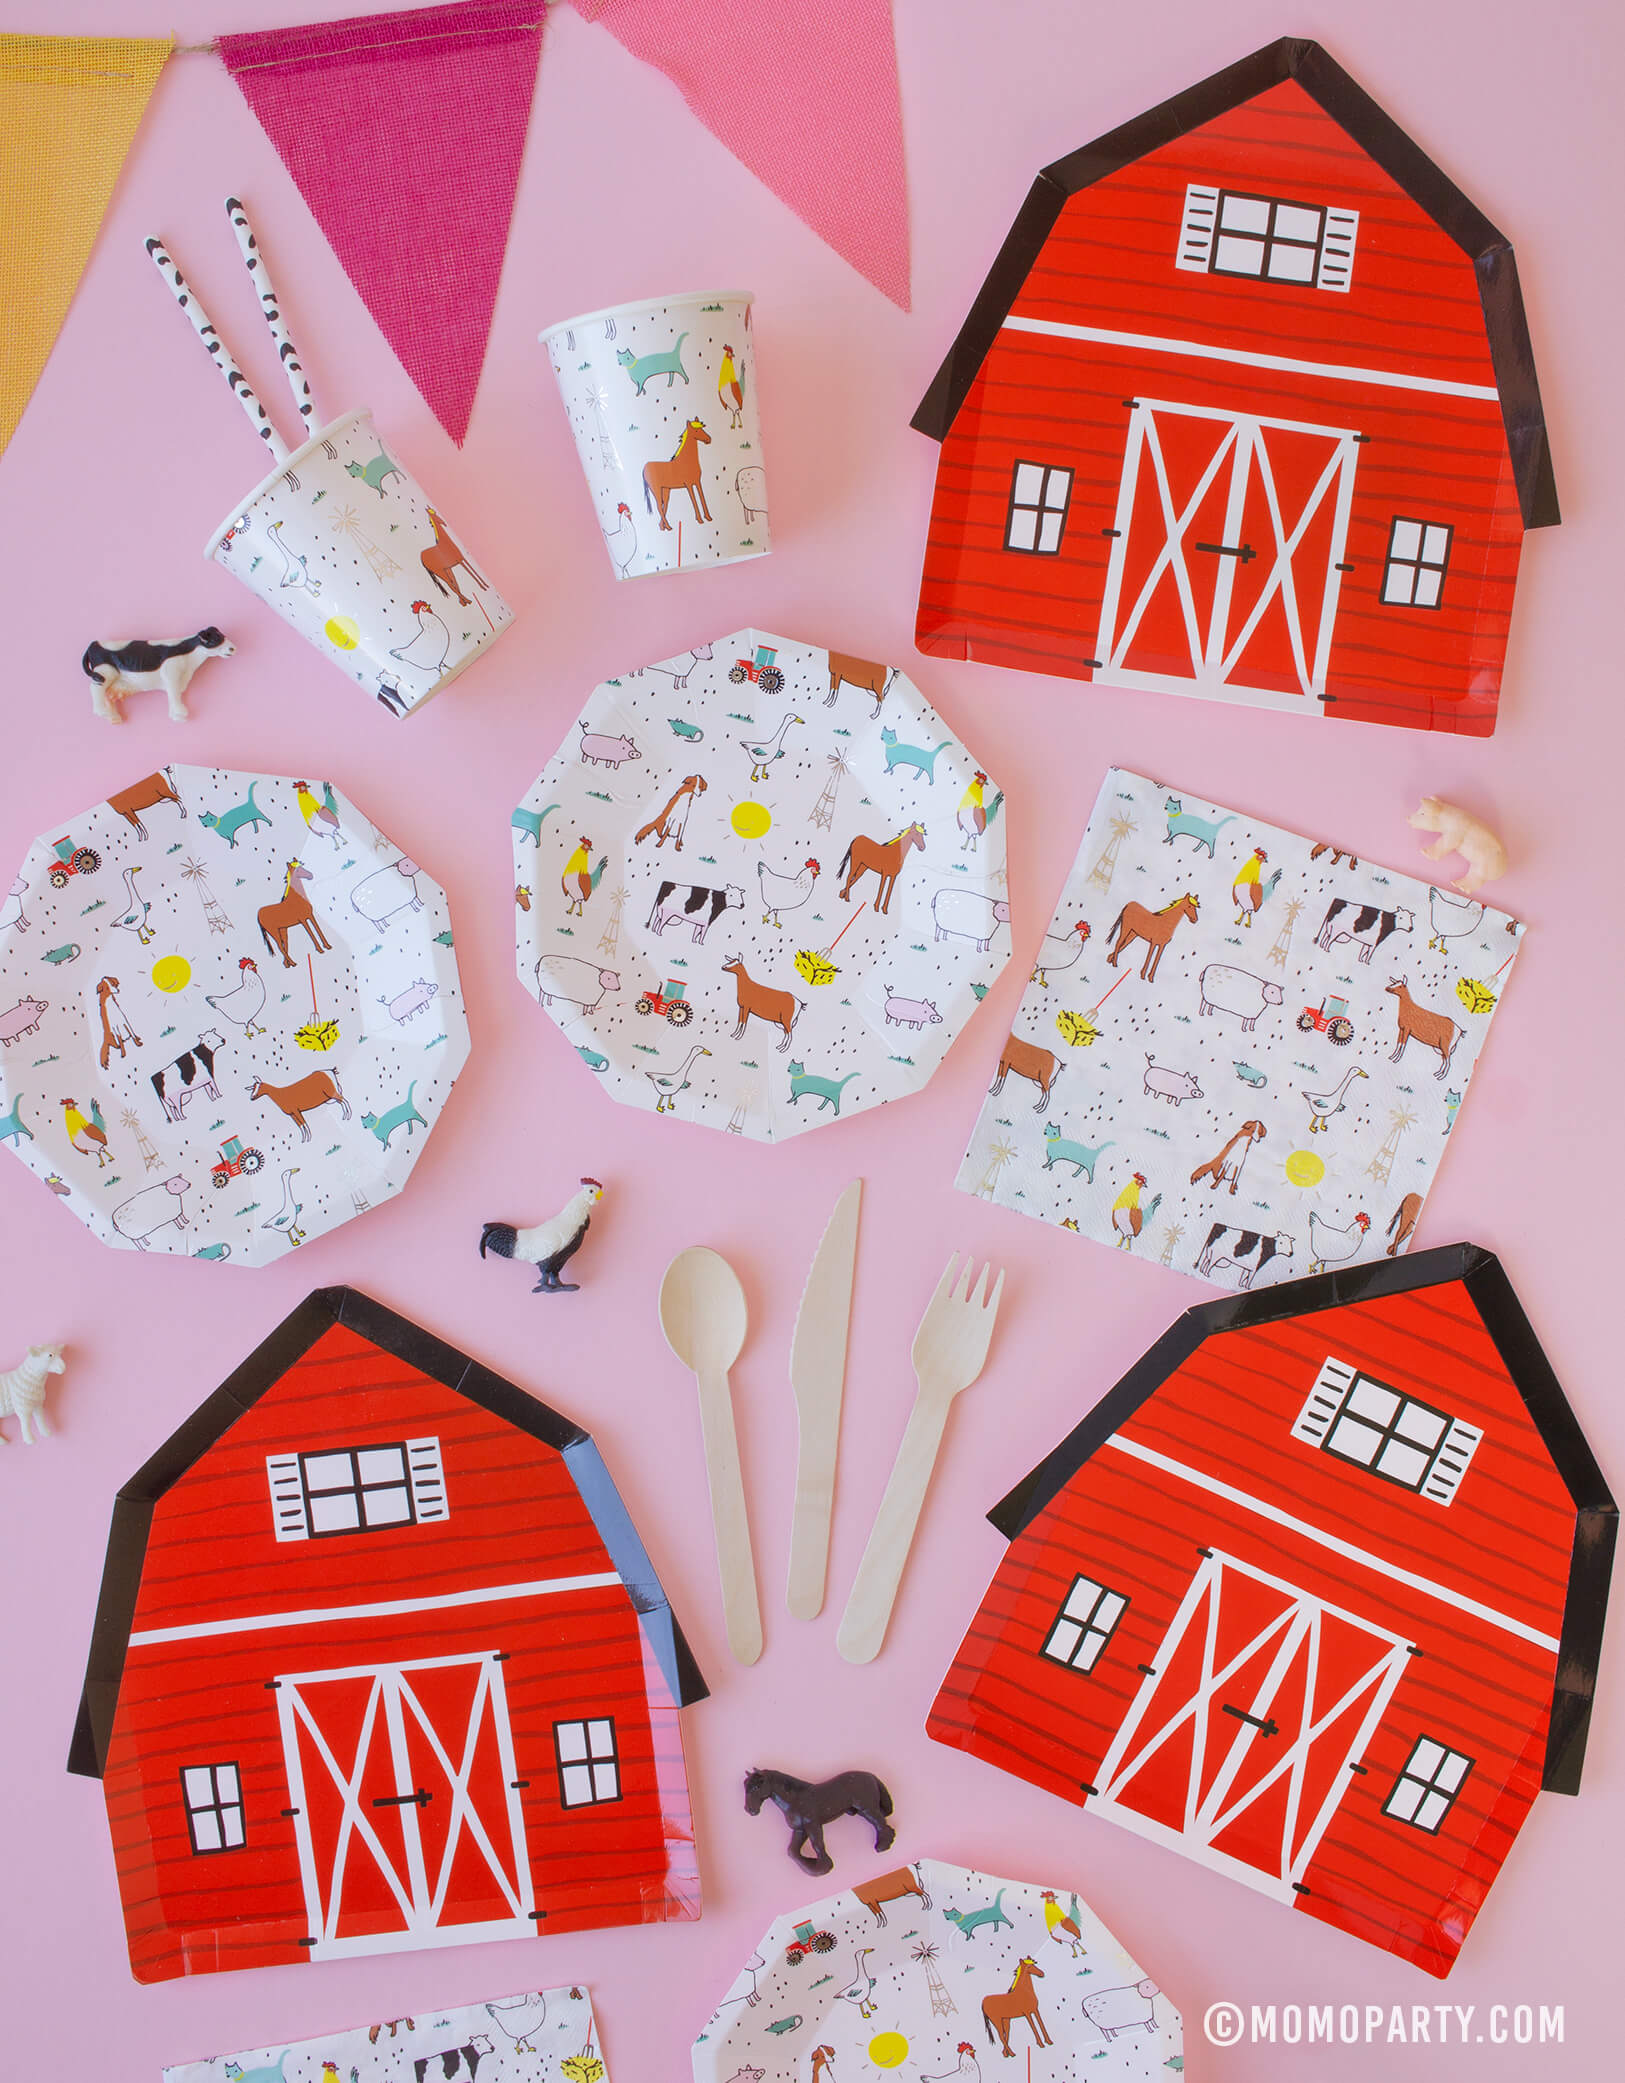 kids Party tablewares of Barnyard plates, farm animal plates, cups, and colorful bunting garland, for Barnyard, Farm themed Kid birthday party